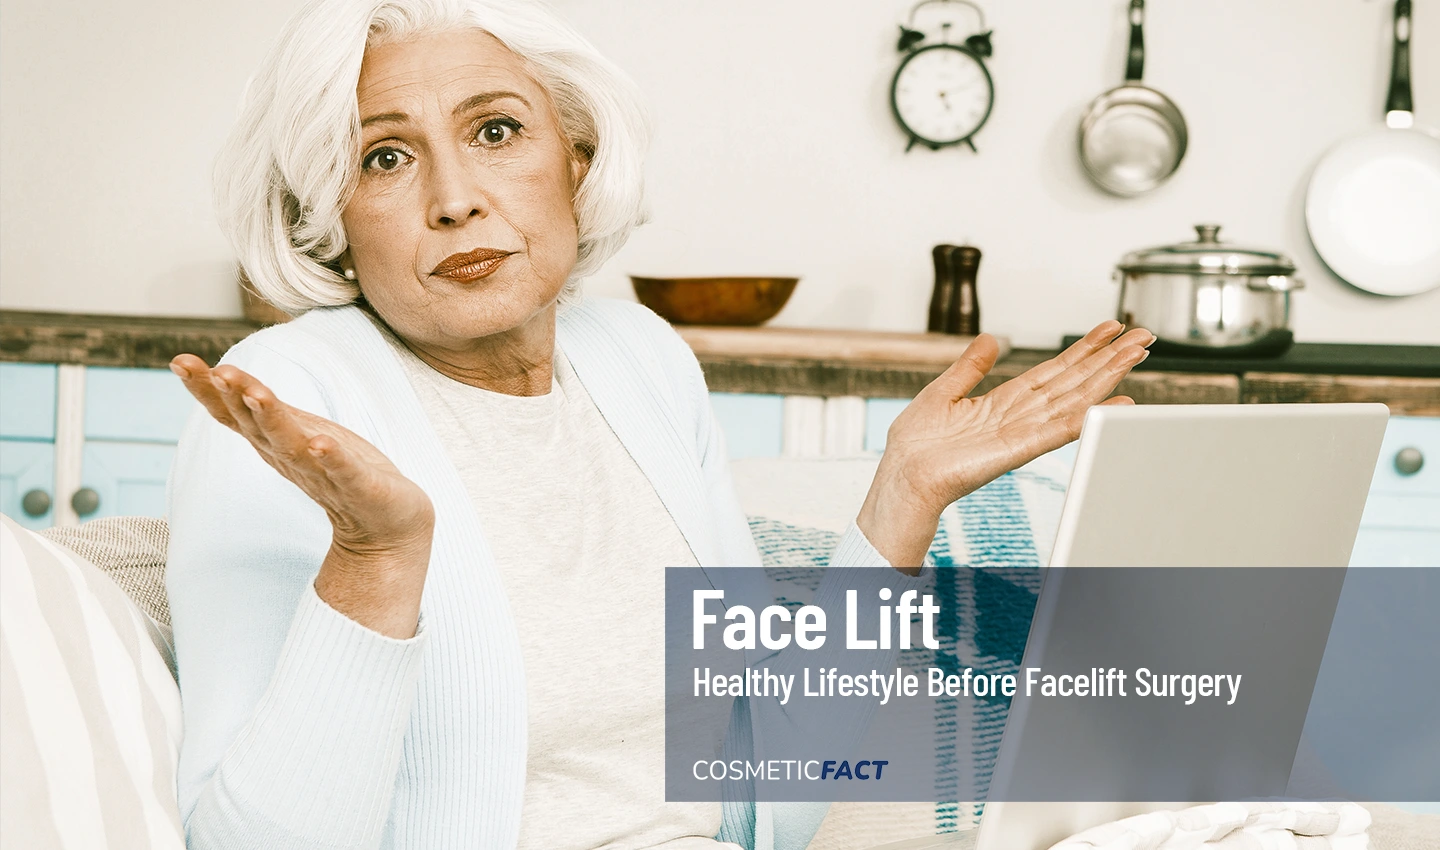 "An elderly woman is seen looking worried while contemplating about how to have a healthy lifestyle before facelift surgery in this image."